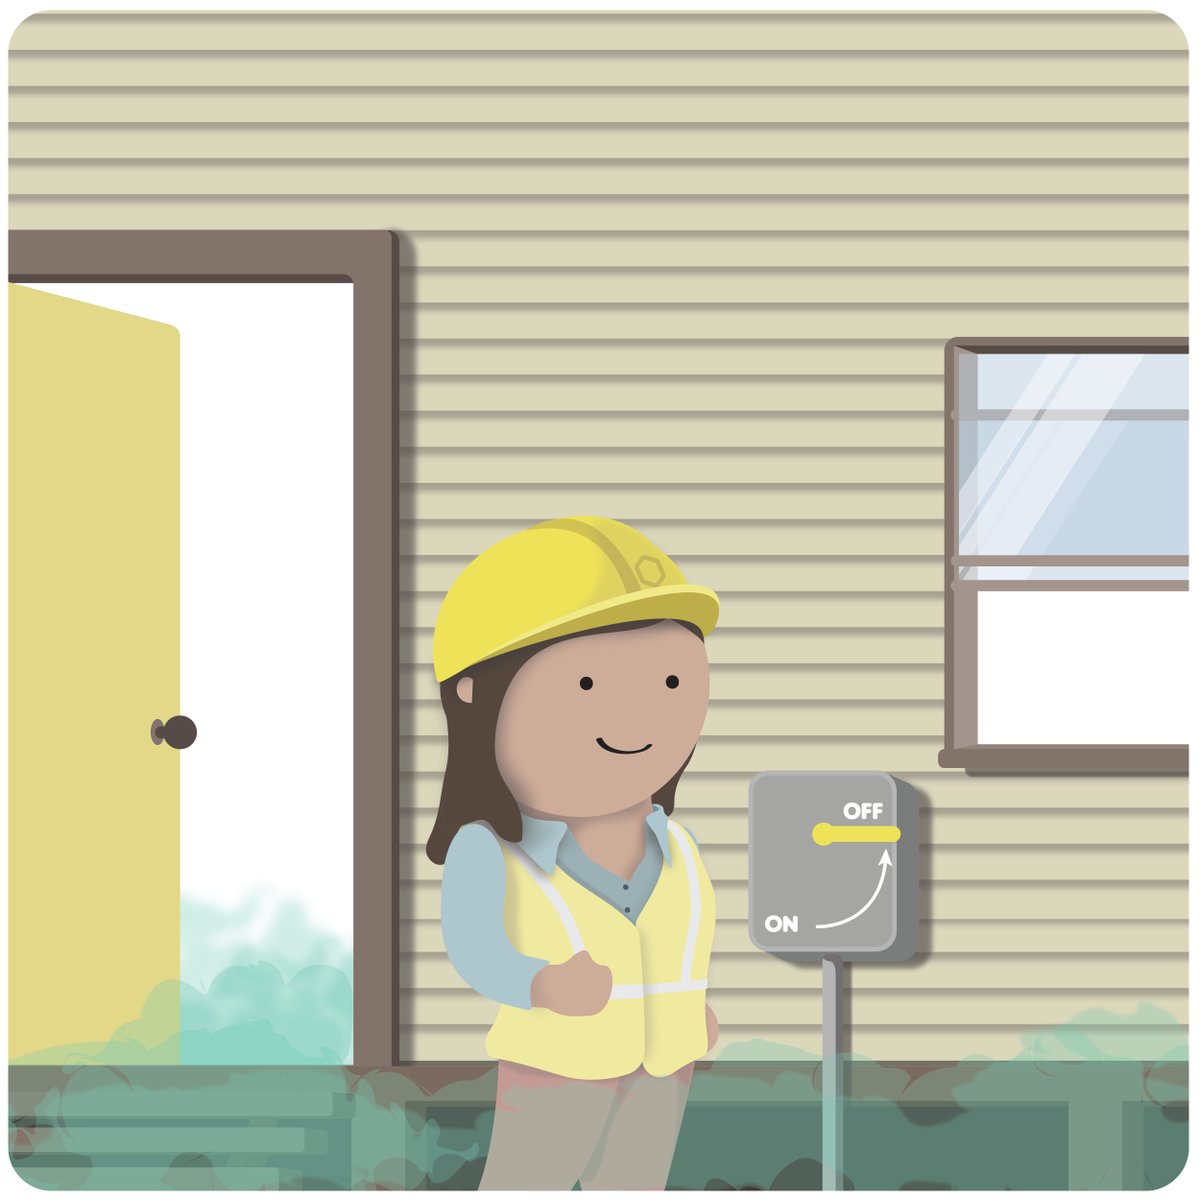 If you are experiencing a leakage, do not operate electrical switches or appliances in the room. Isolate the main electrical supply from the outside only. 
.
.
.
#LPGSafetyTips
#CaymanProtected
#EngineerEllie